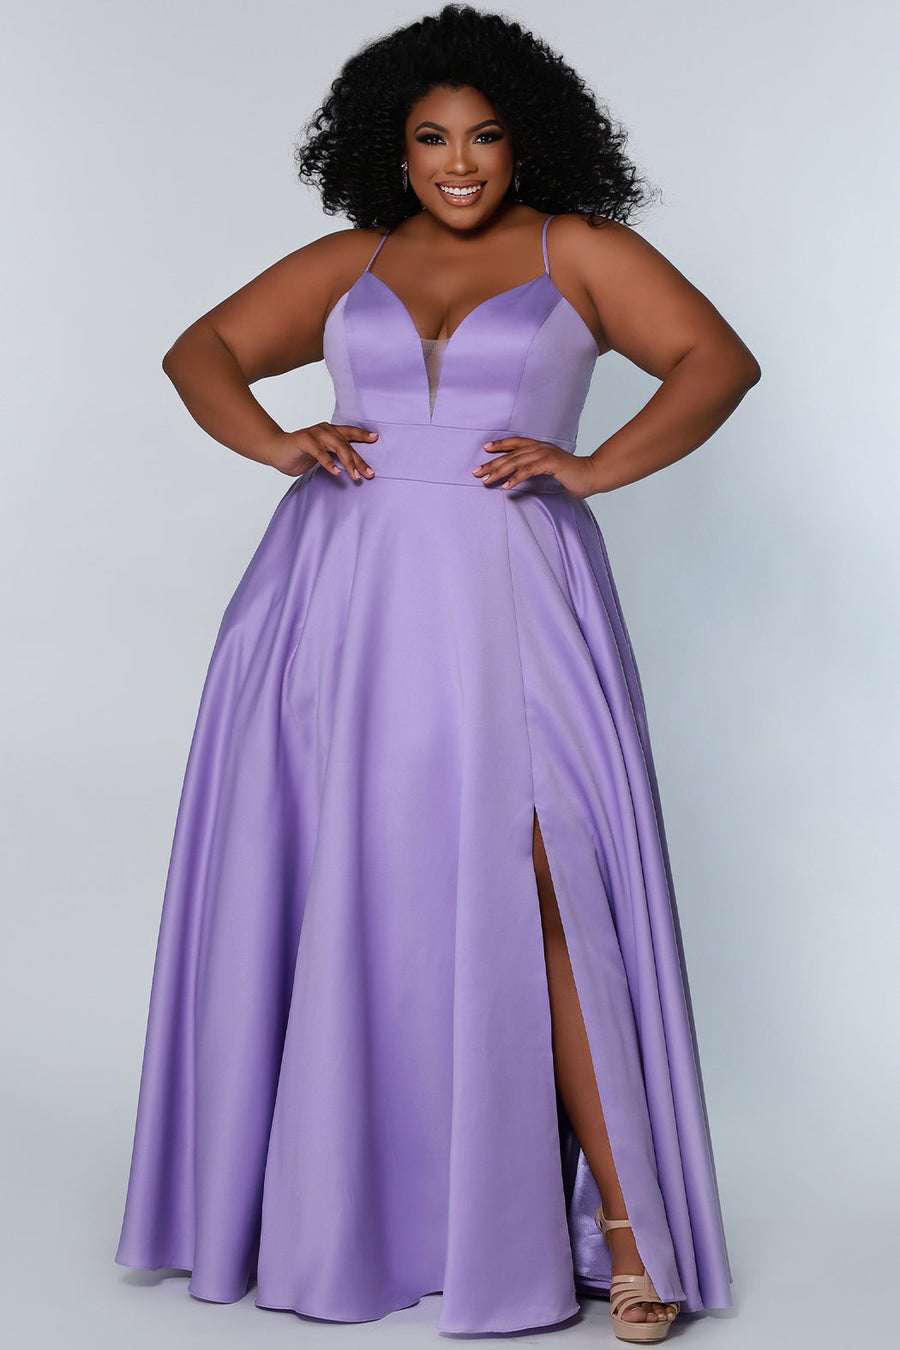 Tease Prom TE2209 Plus size satin a-line dress in lilac with spaghetti straps, a deep v-neckline and a slit.